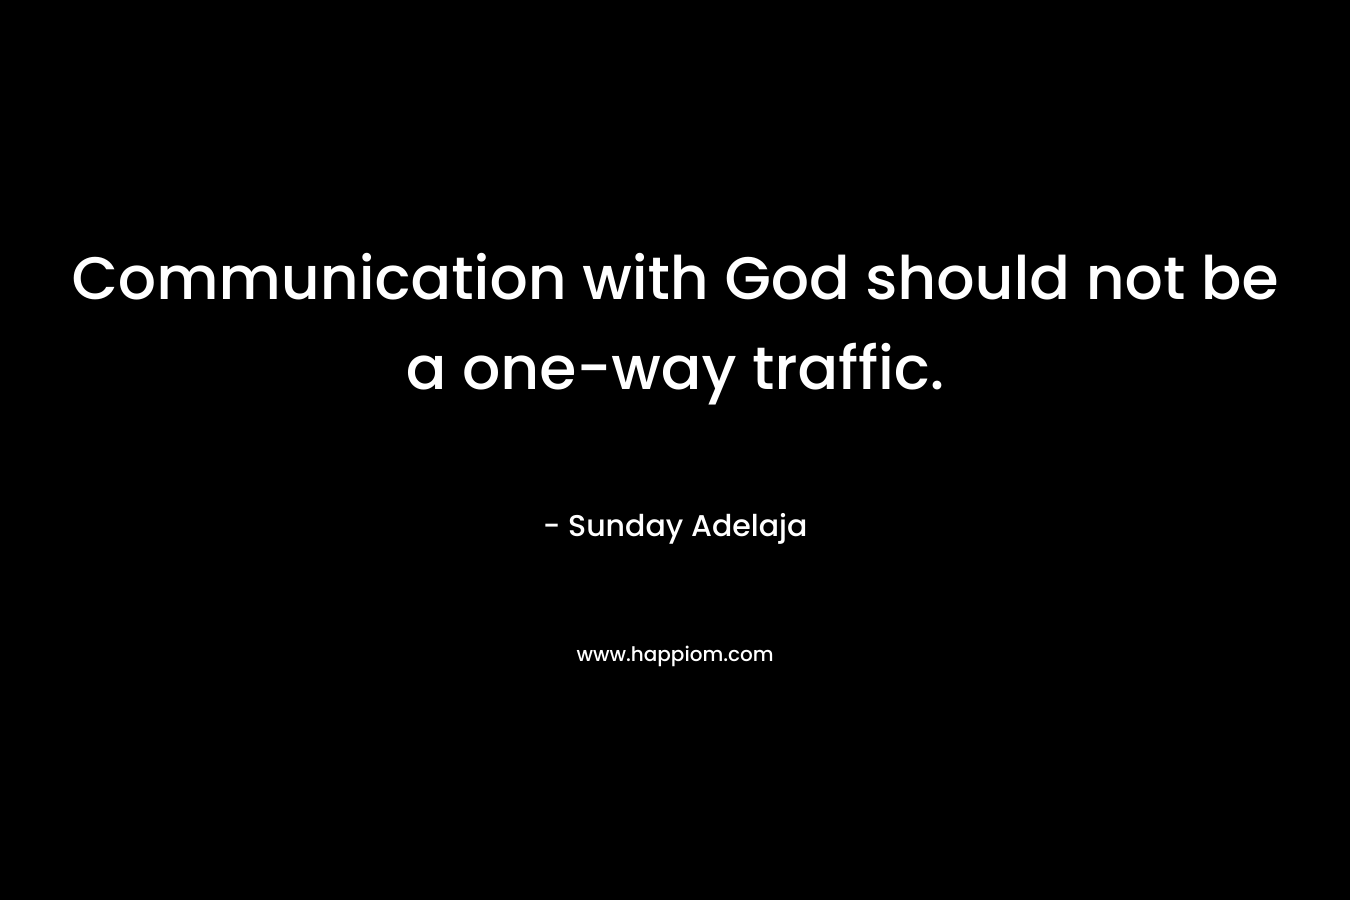 Communication with God should not be a one-way traffic.